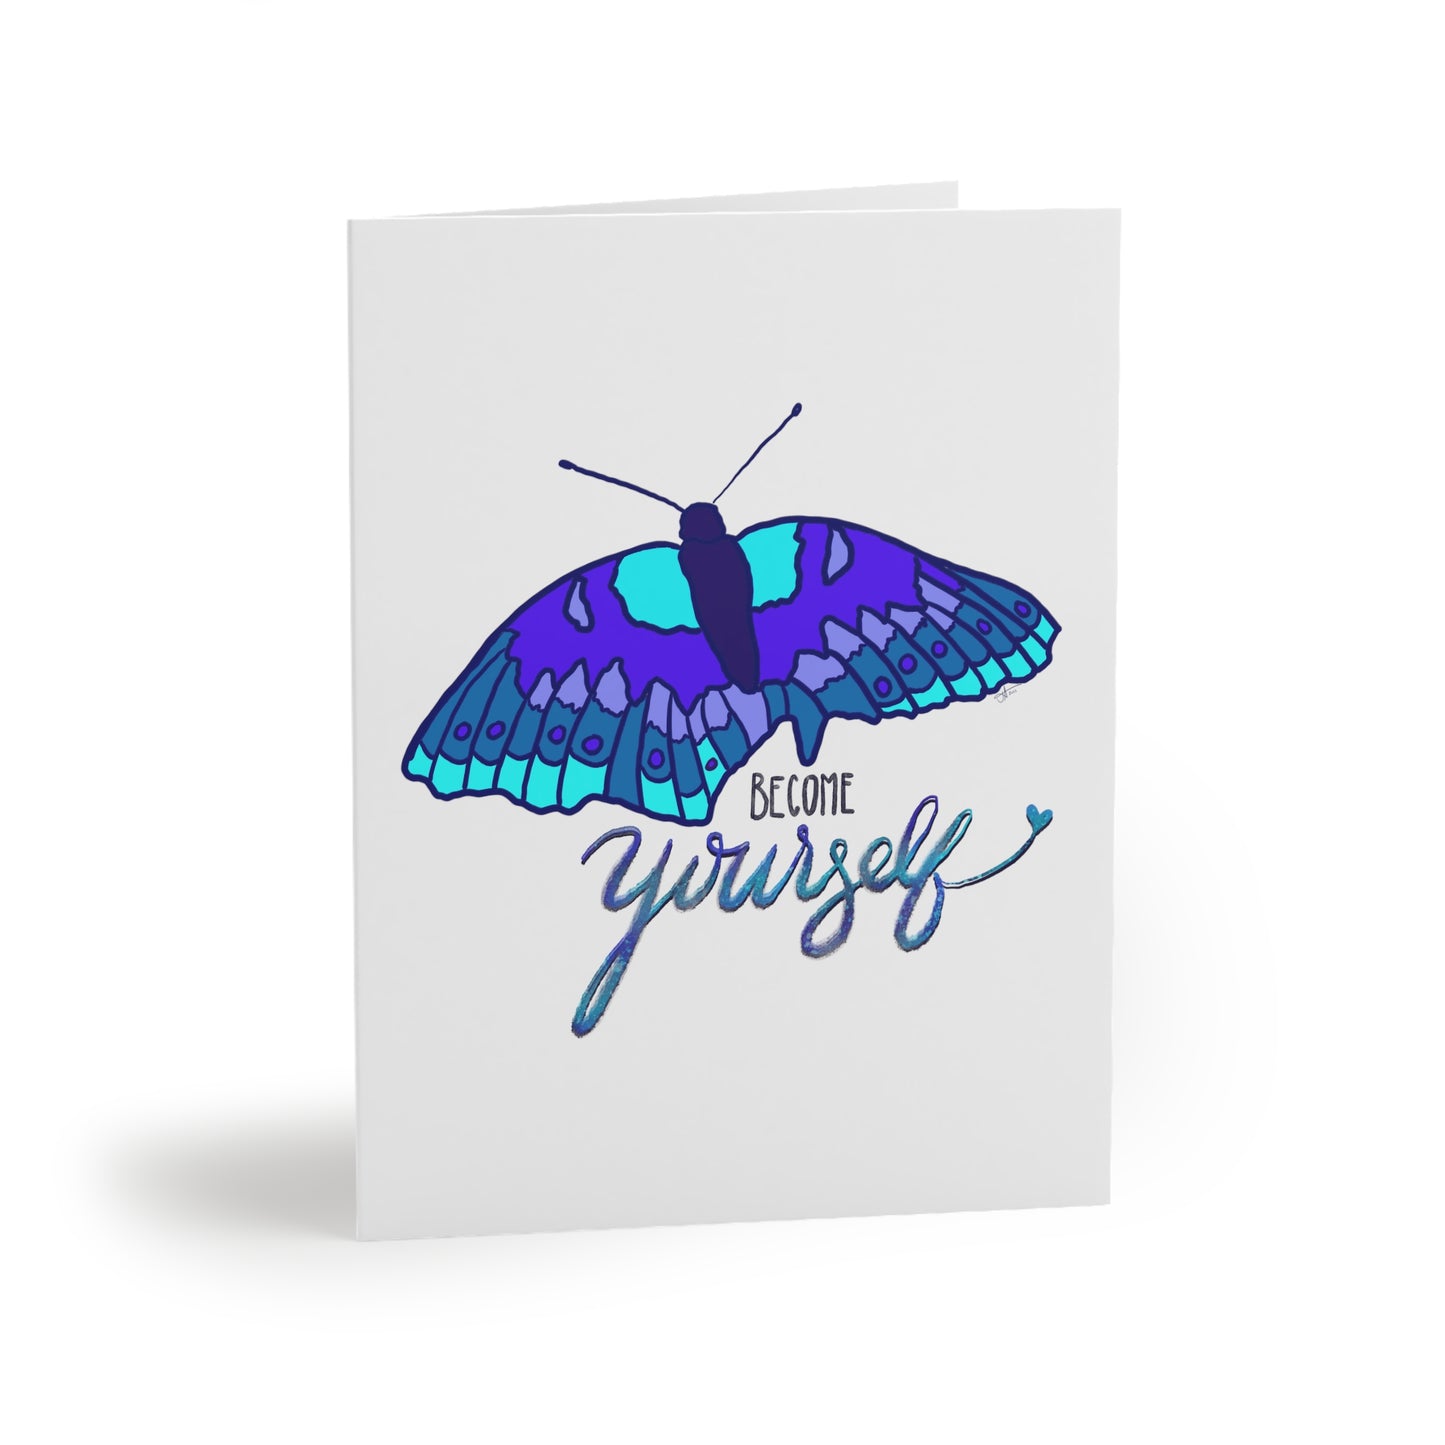 Become Yourself - Greeting cards (8 pack w/ envelopes)